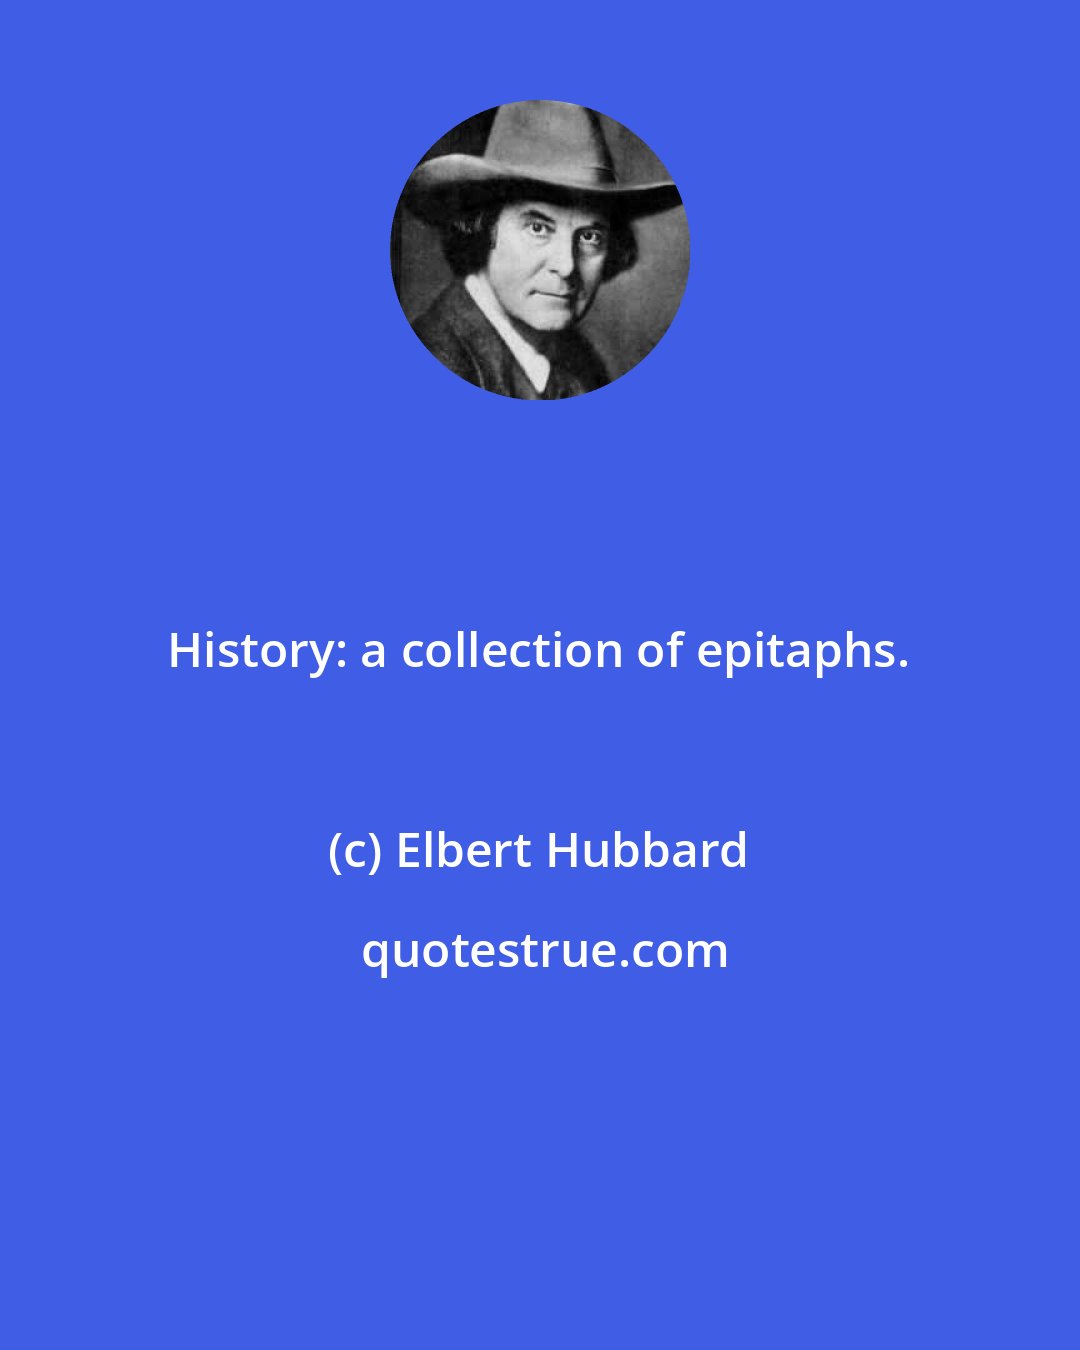 Elbert Hubbard: History: a collection of epitaphs.